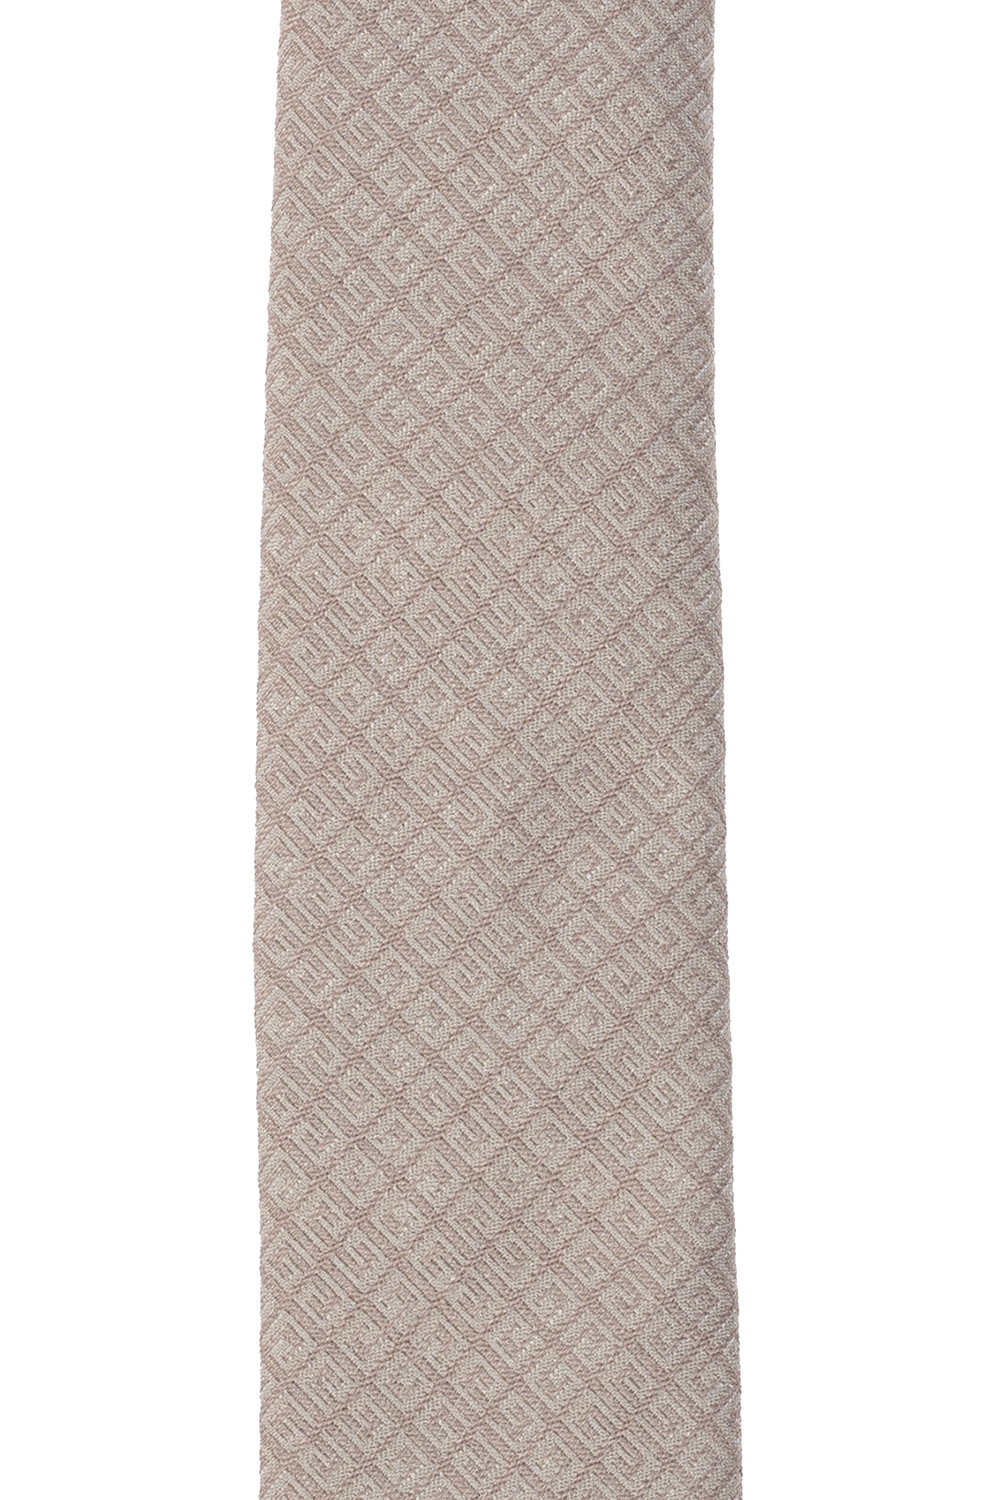 givenchy knitted Silk tie